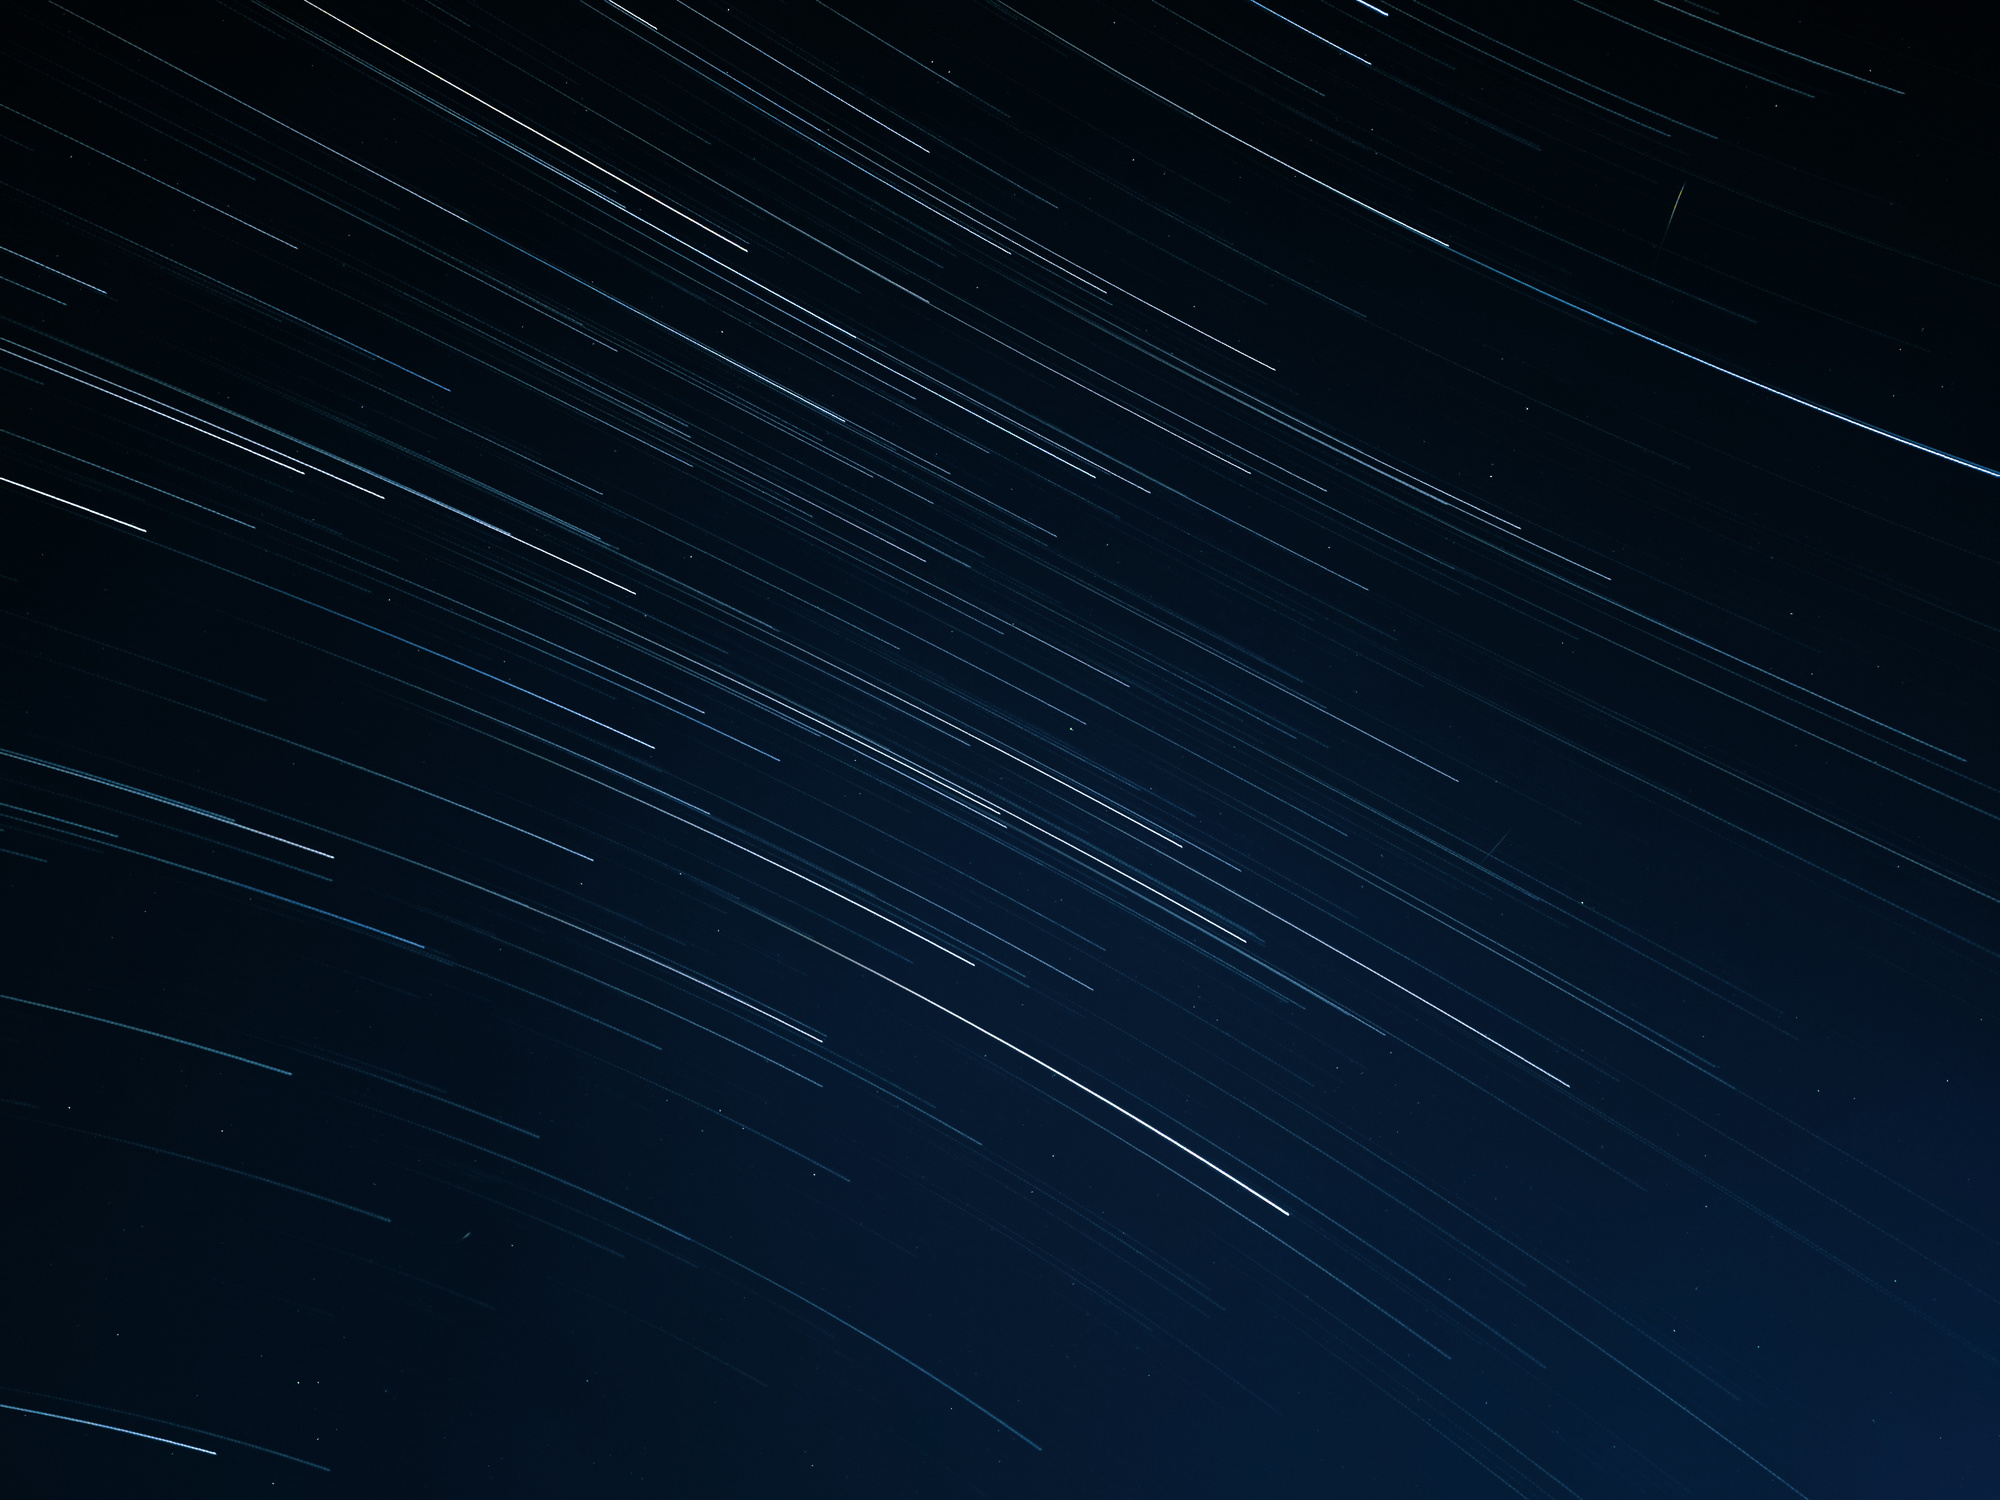 Blurred Motion of Stars in Navy Blue Sky